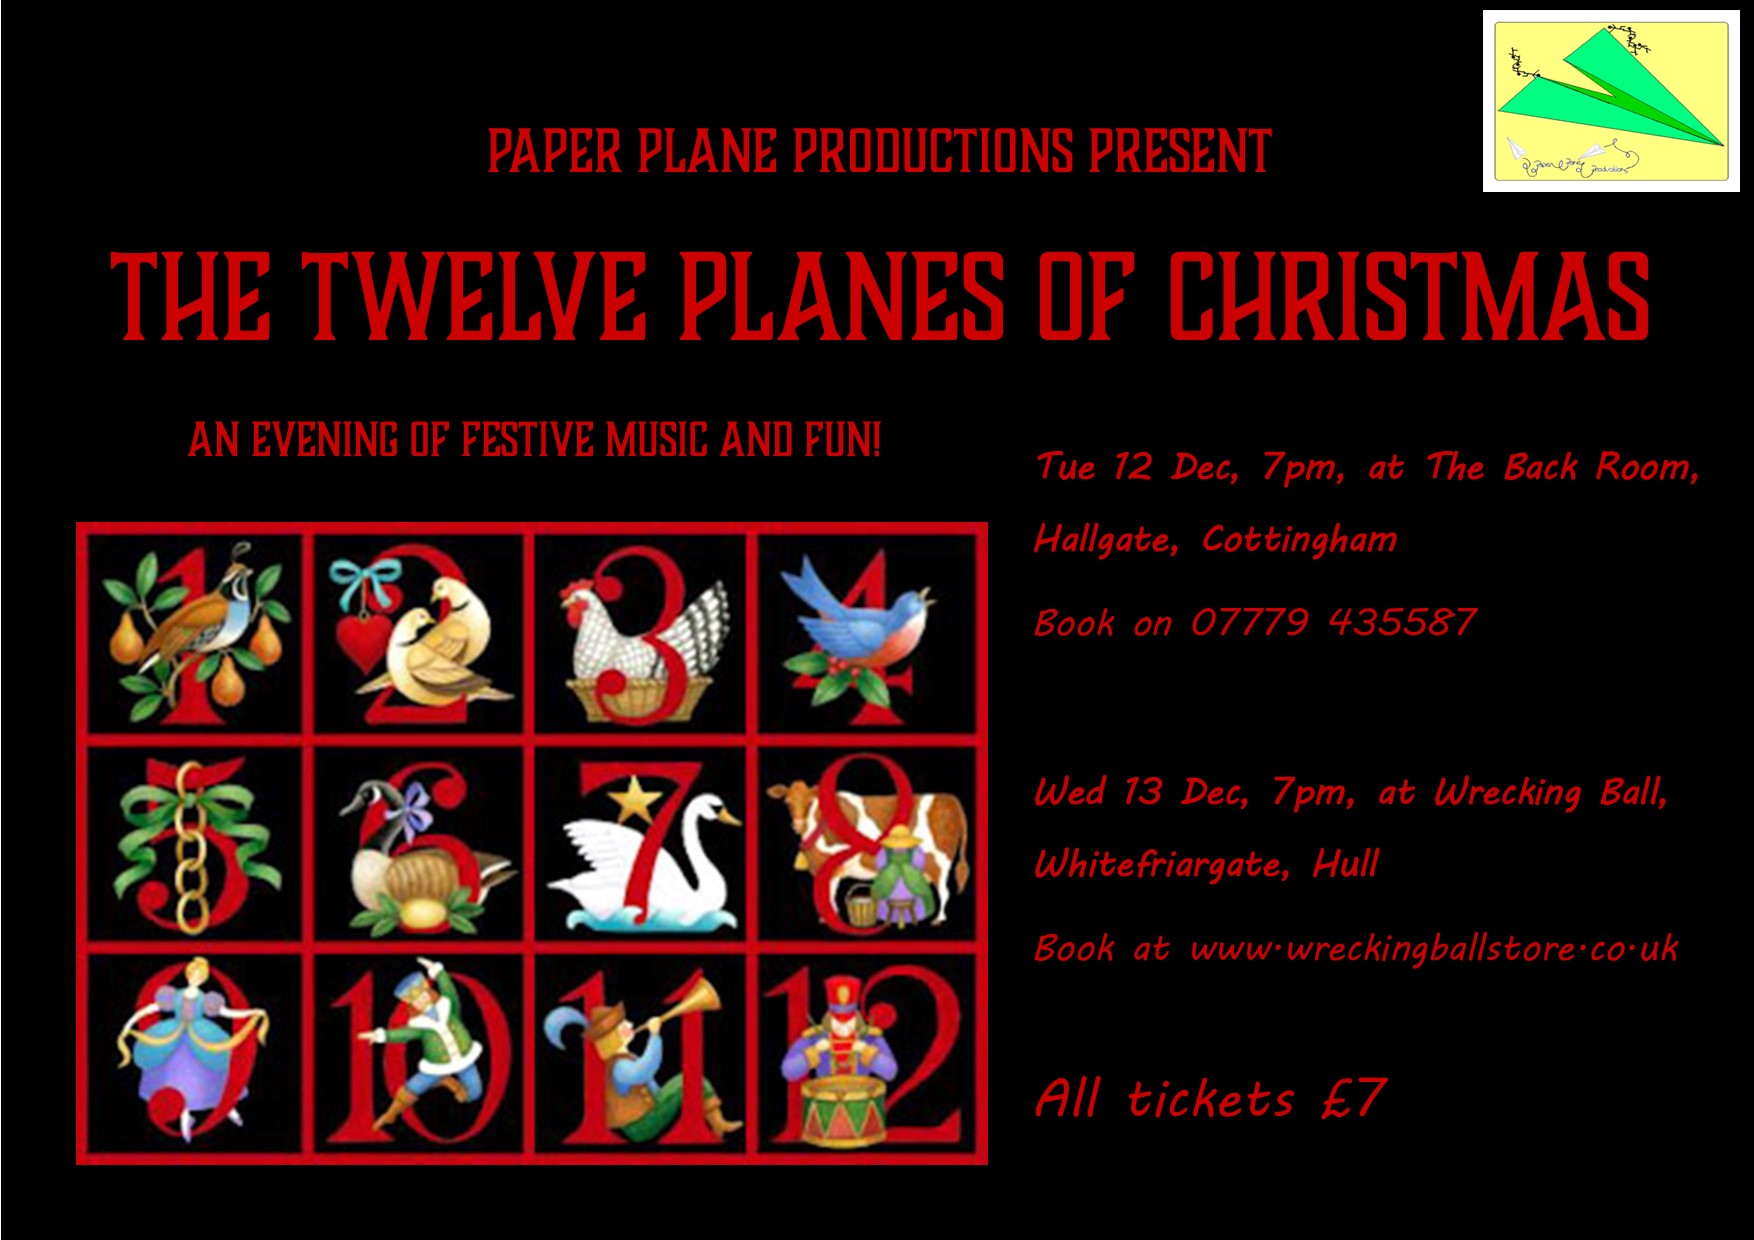 The Twelve Planes of Christmas publicity (1)